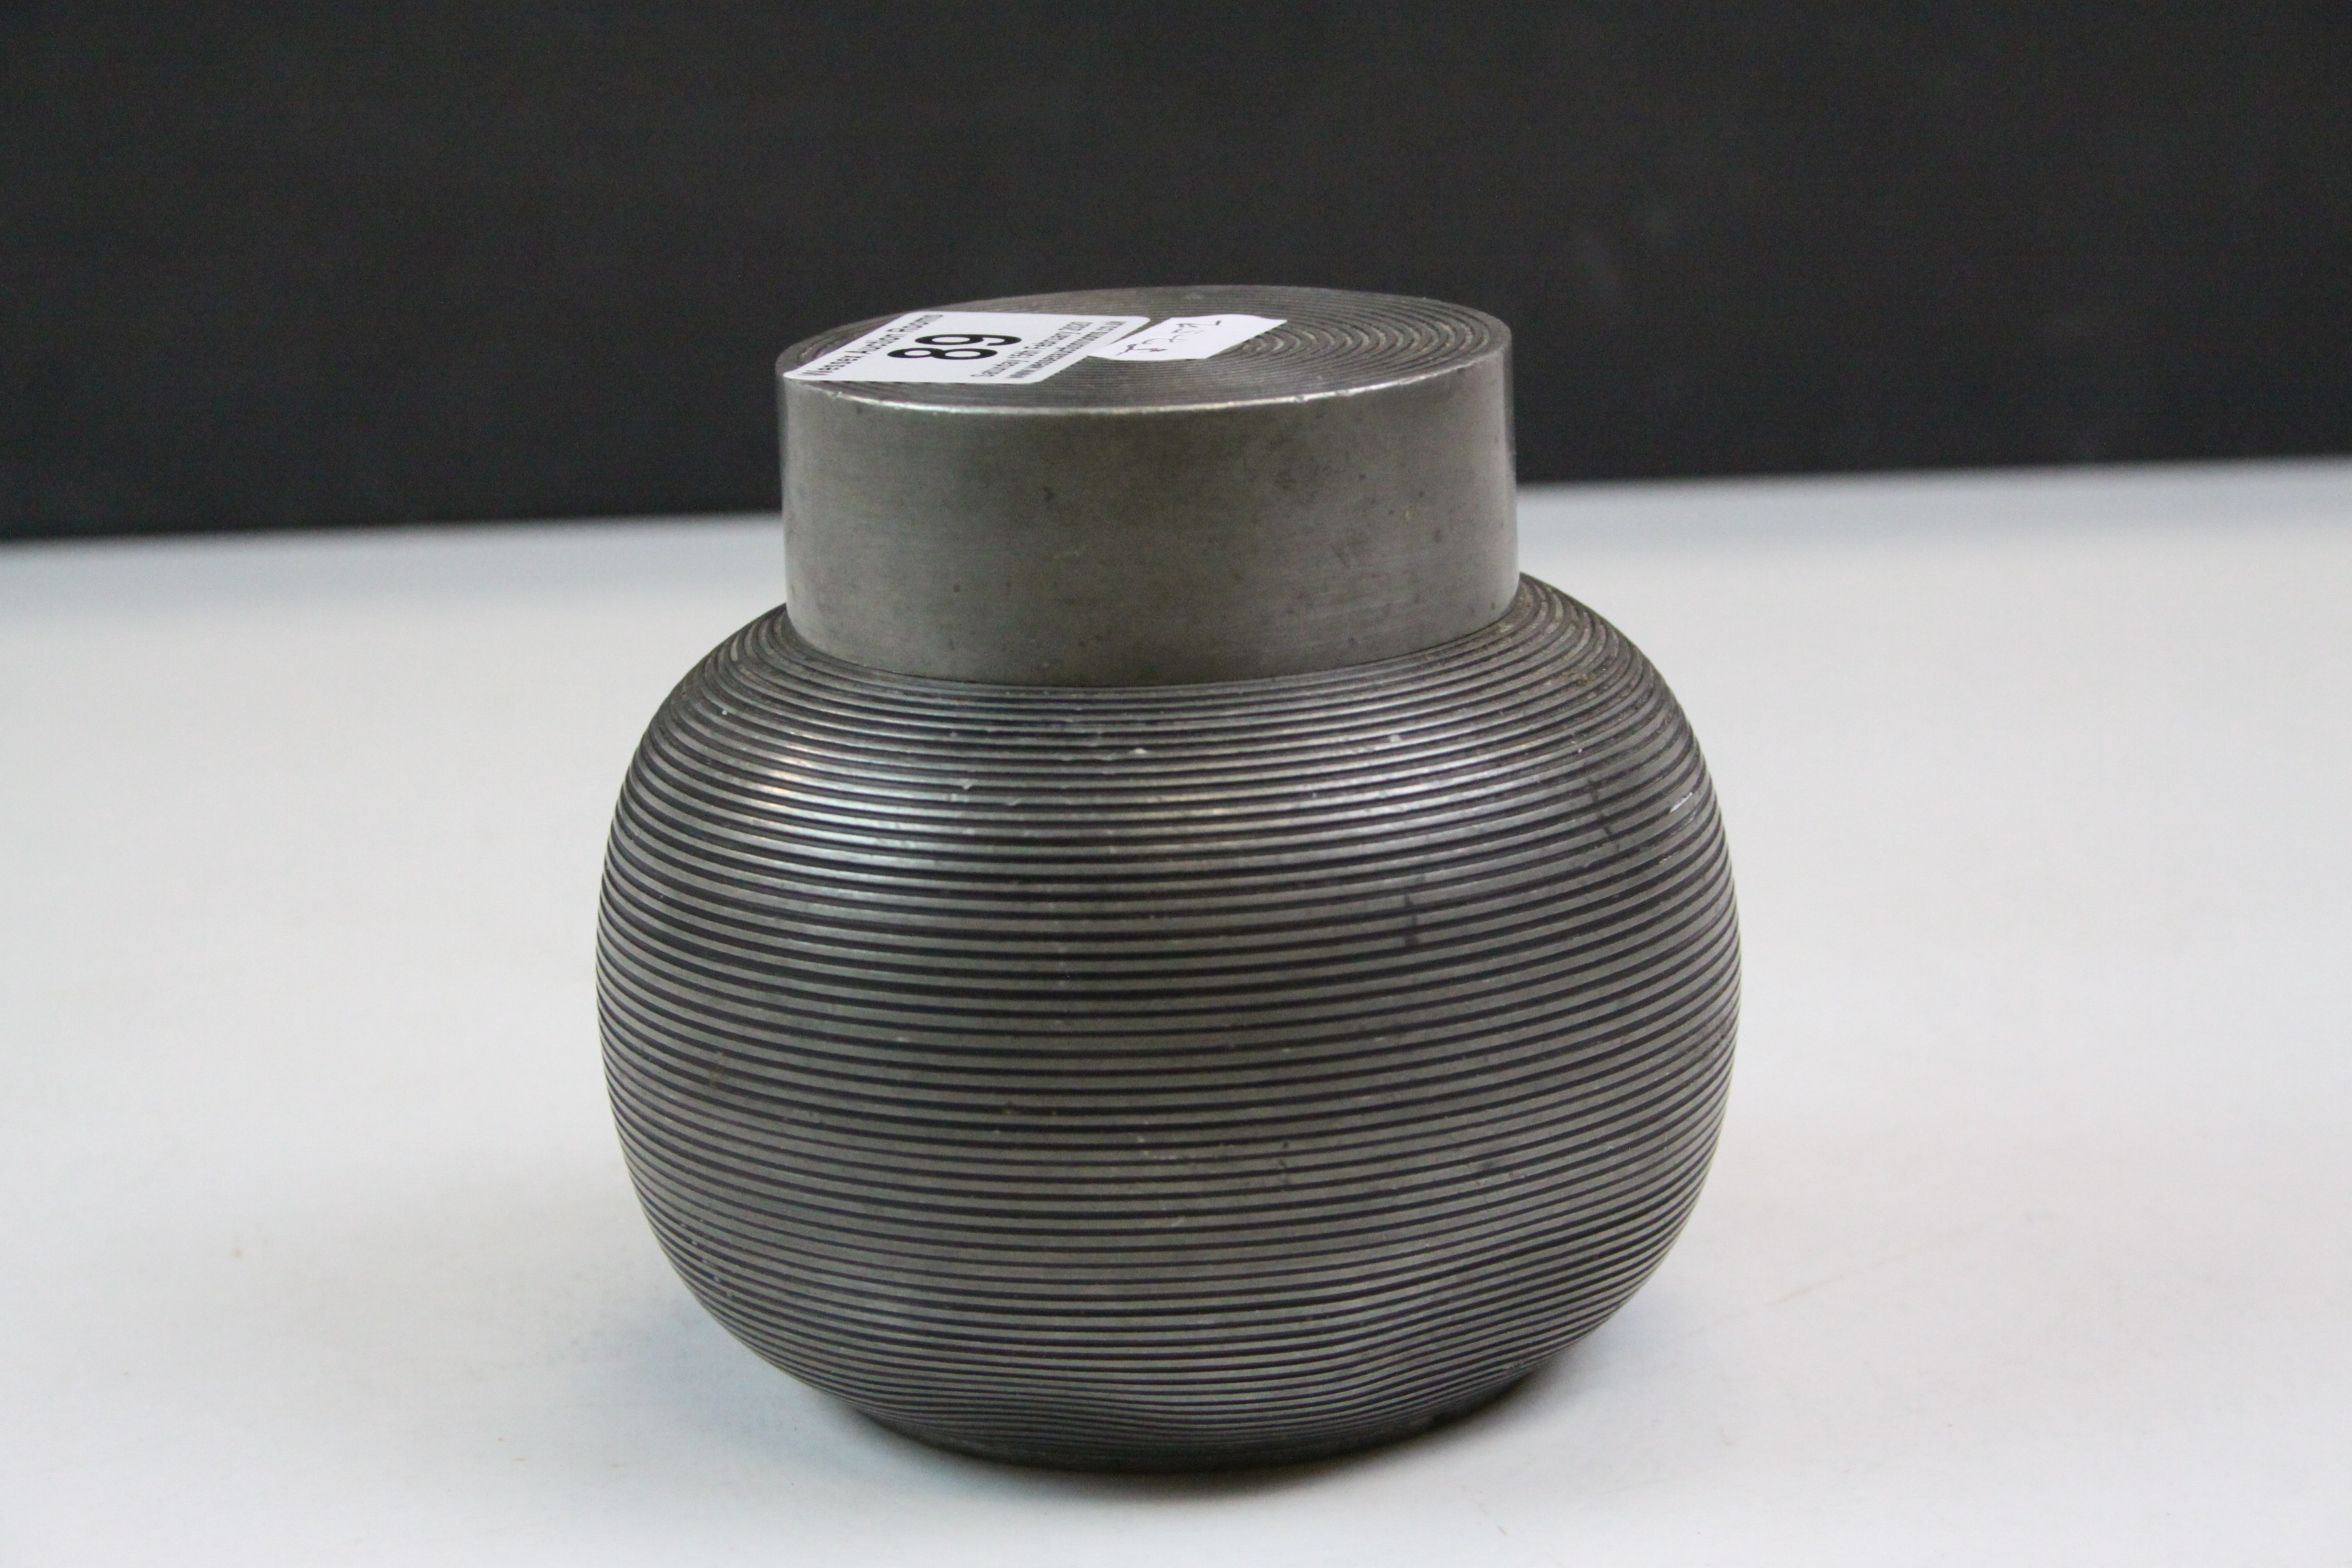 Pewter tea caddy of spherical reeded form, complete with interior lid and cover, height